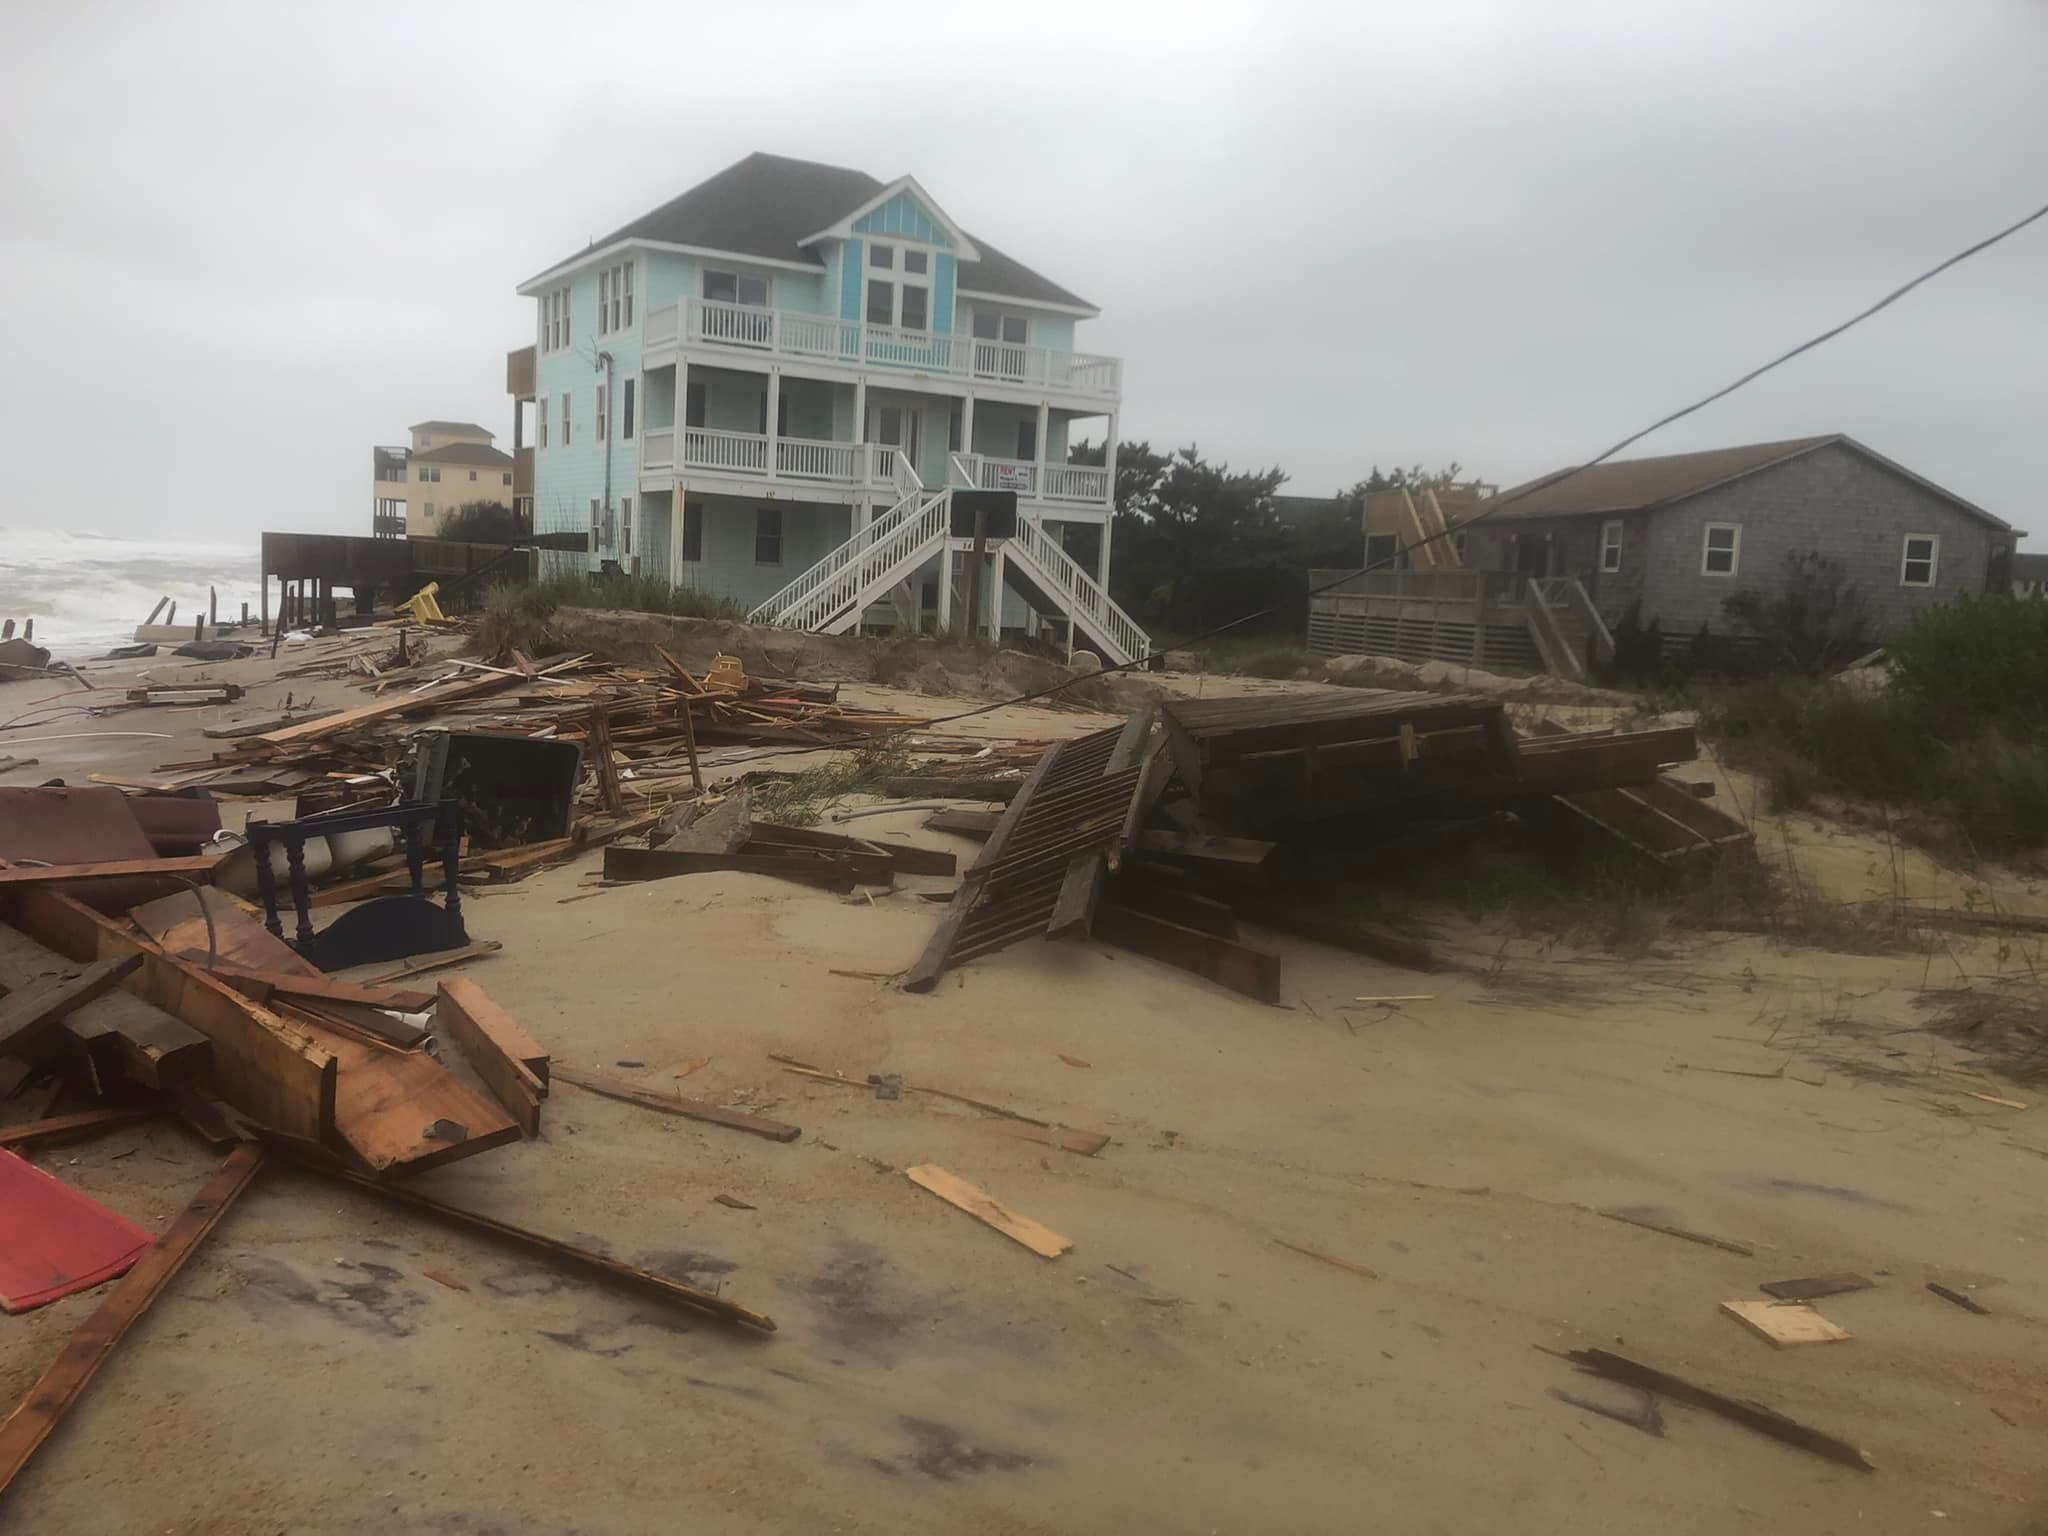 Public meeting August 24 on threatened oceanfront homes in Rodanthe